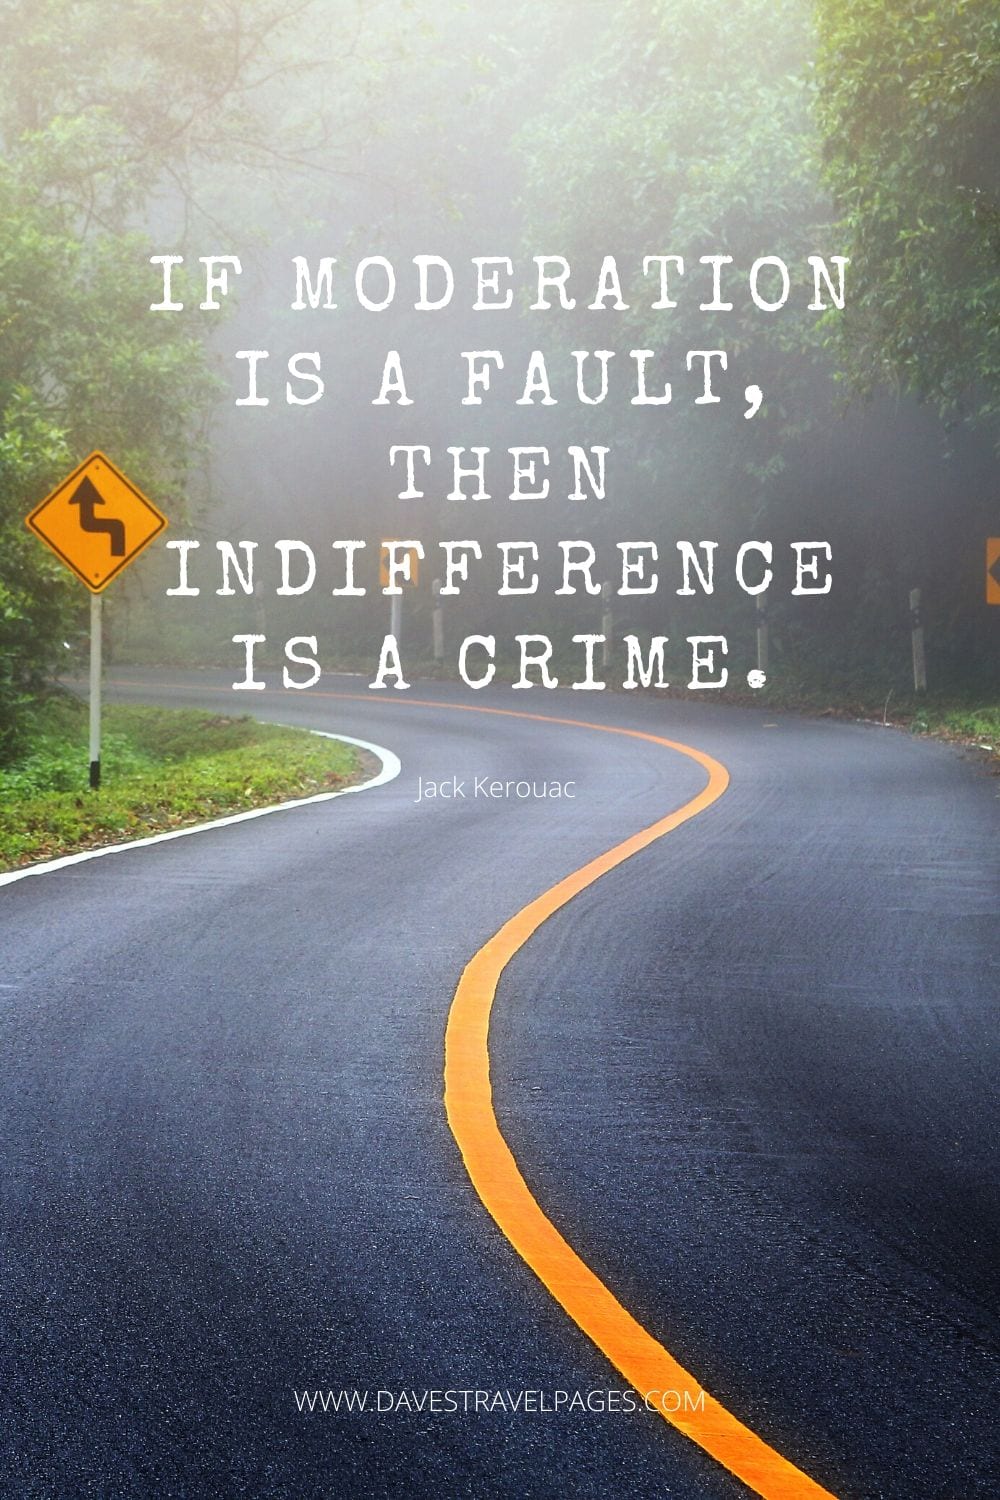 “If moderation is a fault, then indifference is a crime.” Quote by Jack Kerouac